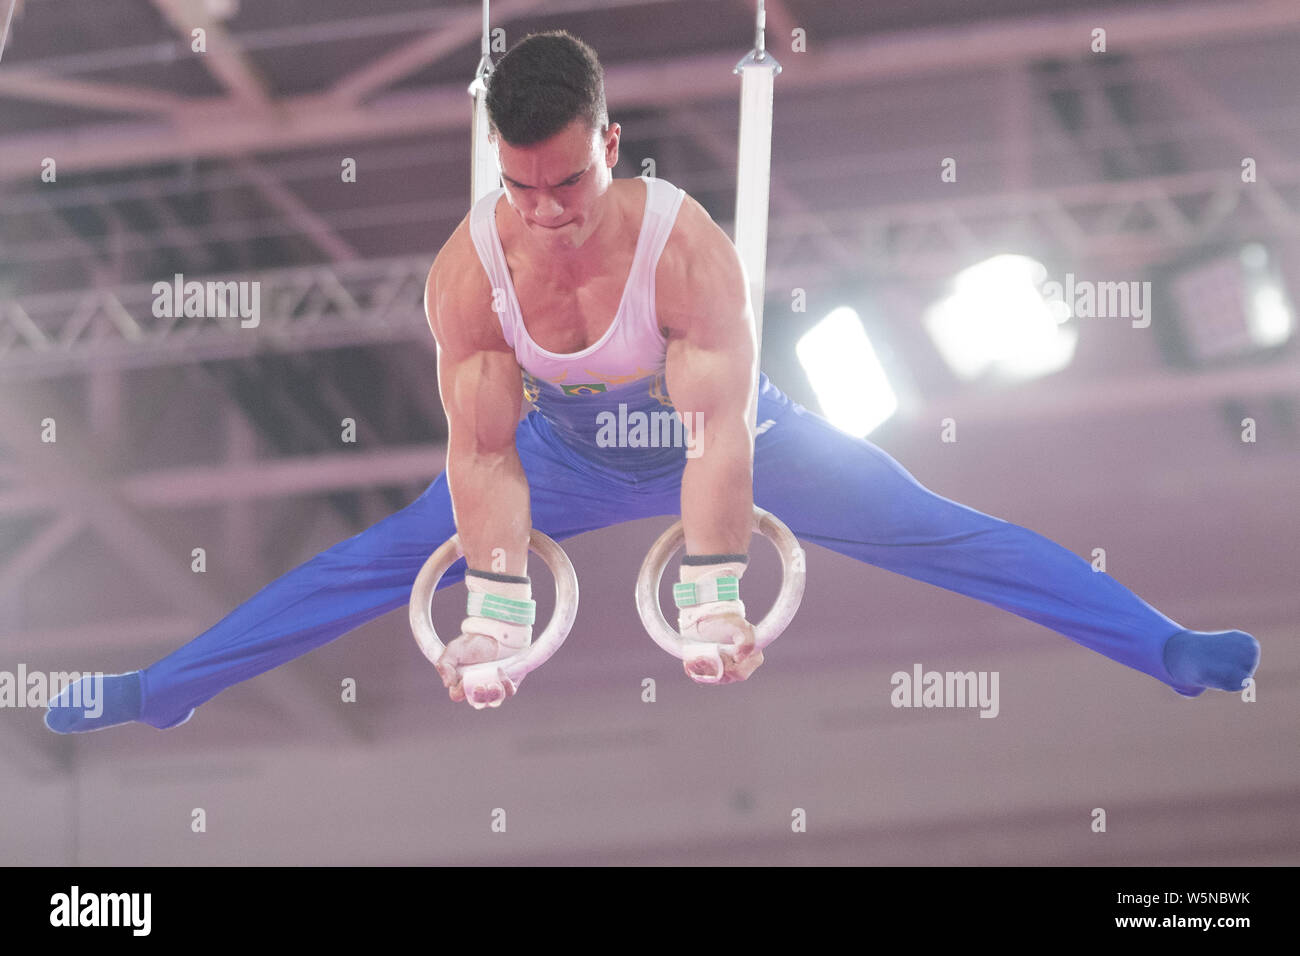 Lima, Peru. 28th July, 2019. Caio Souza (#80) of Brazil performs on the still rings during the Pan American Games Artistic Gymnastics, Men's Team Qualification and Final at Polideportivo Villa el Salvador in Lima, Peru. Daniel Lea/CSM/Alamy Live News Stock Photo